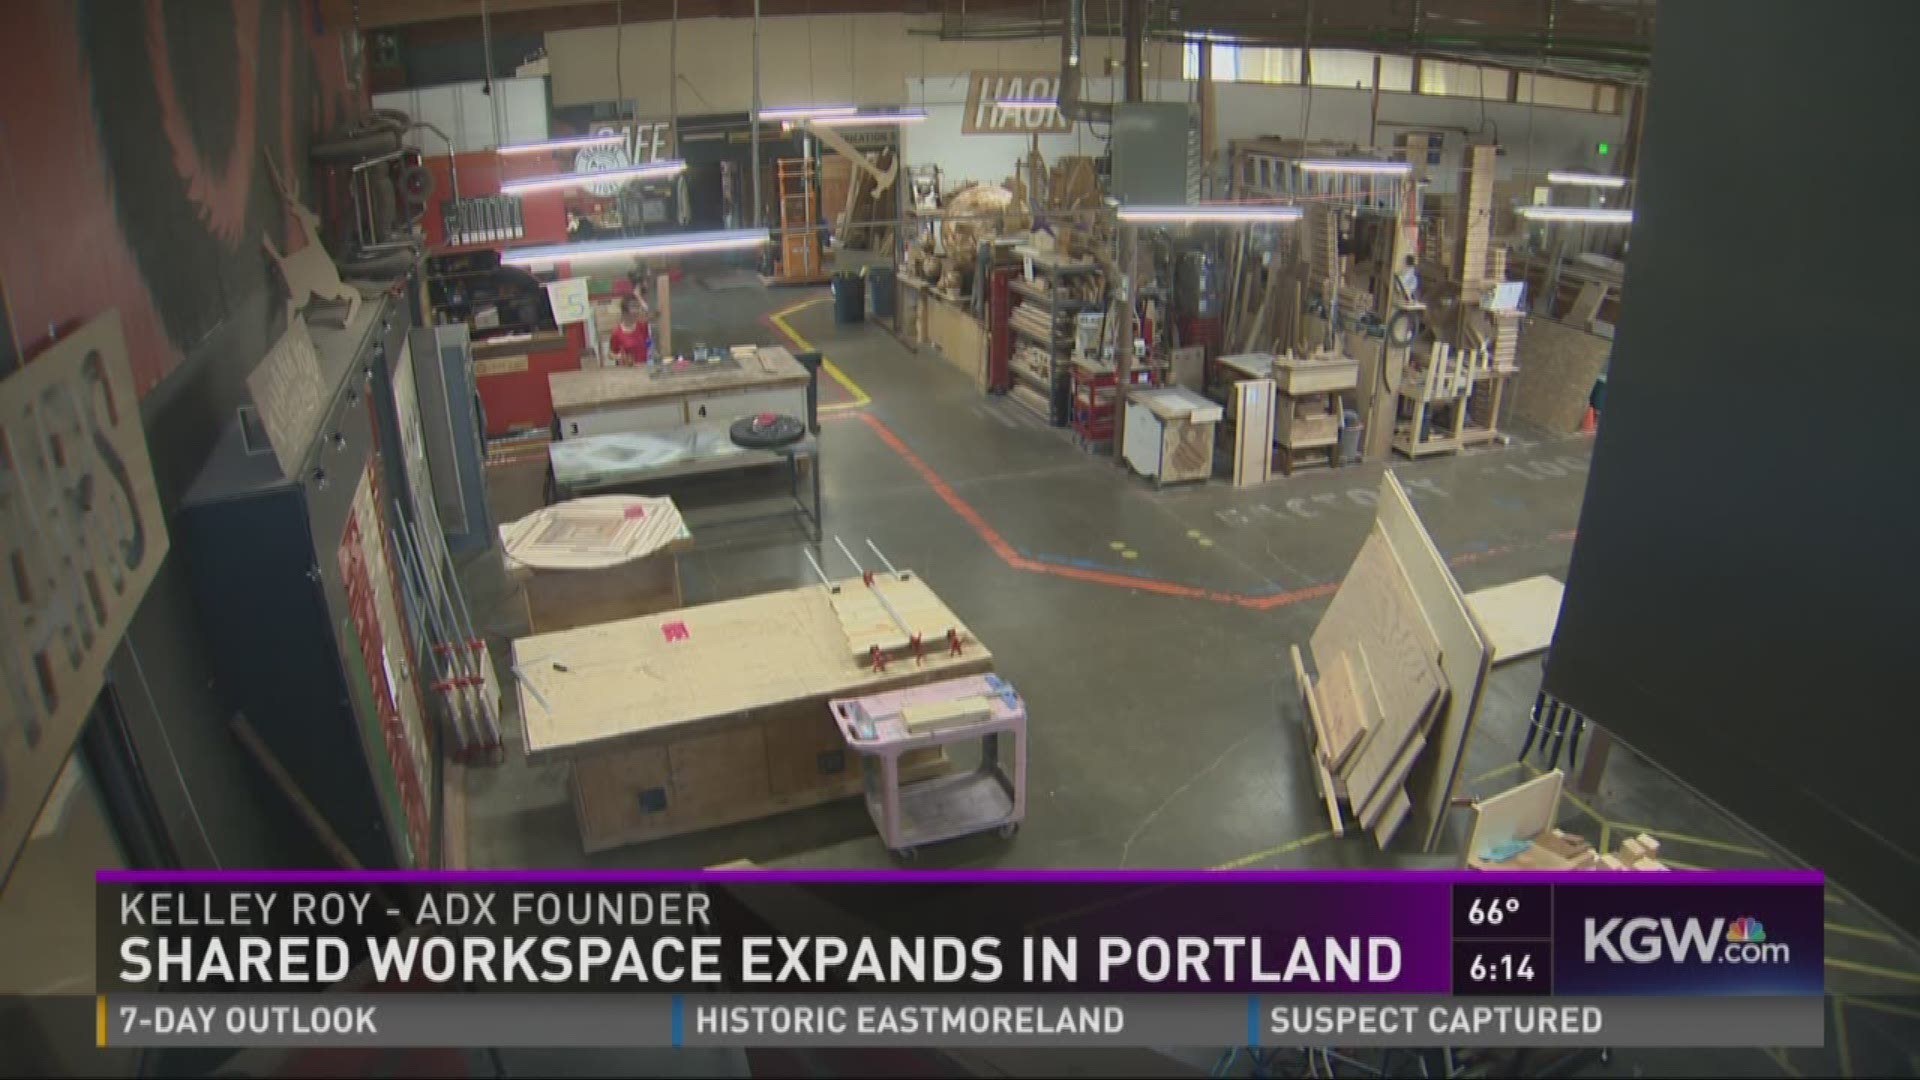 Shared workspace expands in Portland